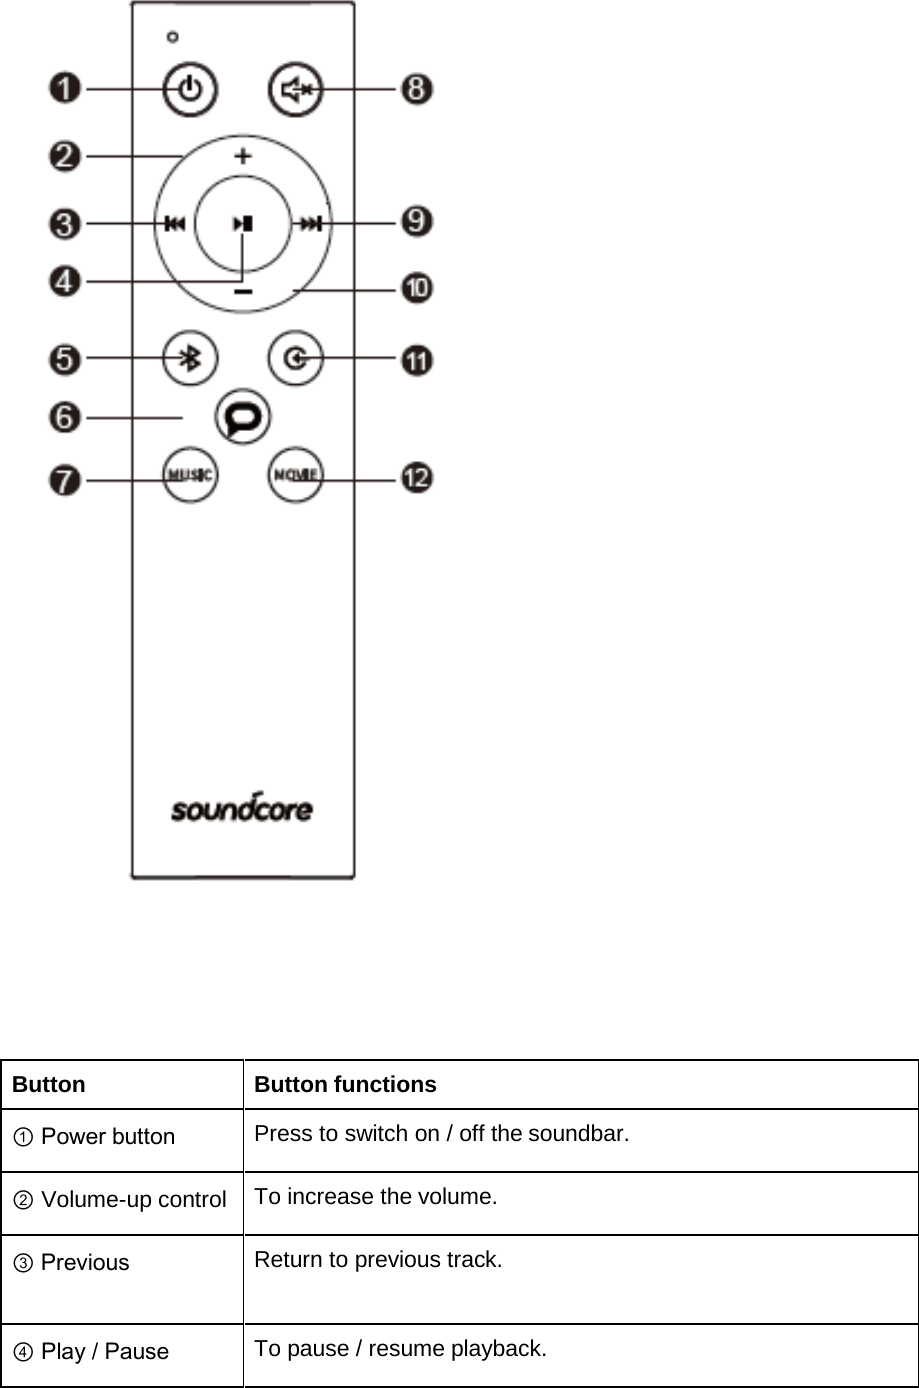        Button Button functions ① Power button Press to switch on / off the soundbar. ② Volume-up control To increase the volume. ③ Previous Return to previous track. ④ Play / Pause To pause / resume playback. 